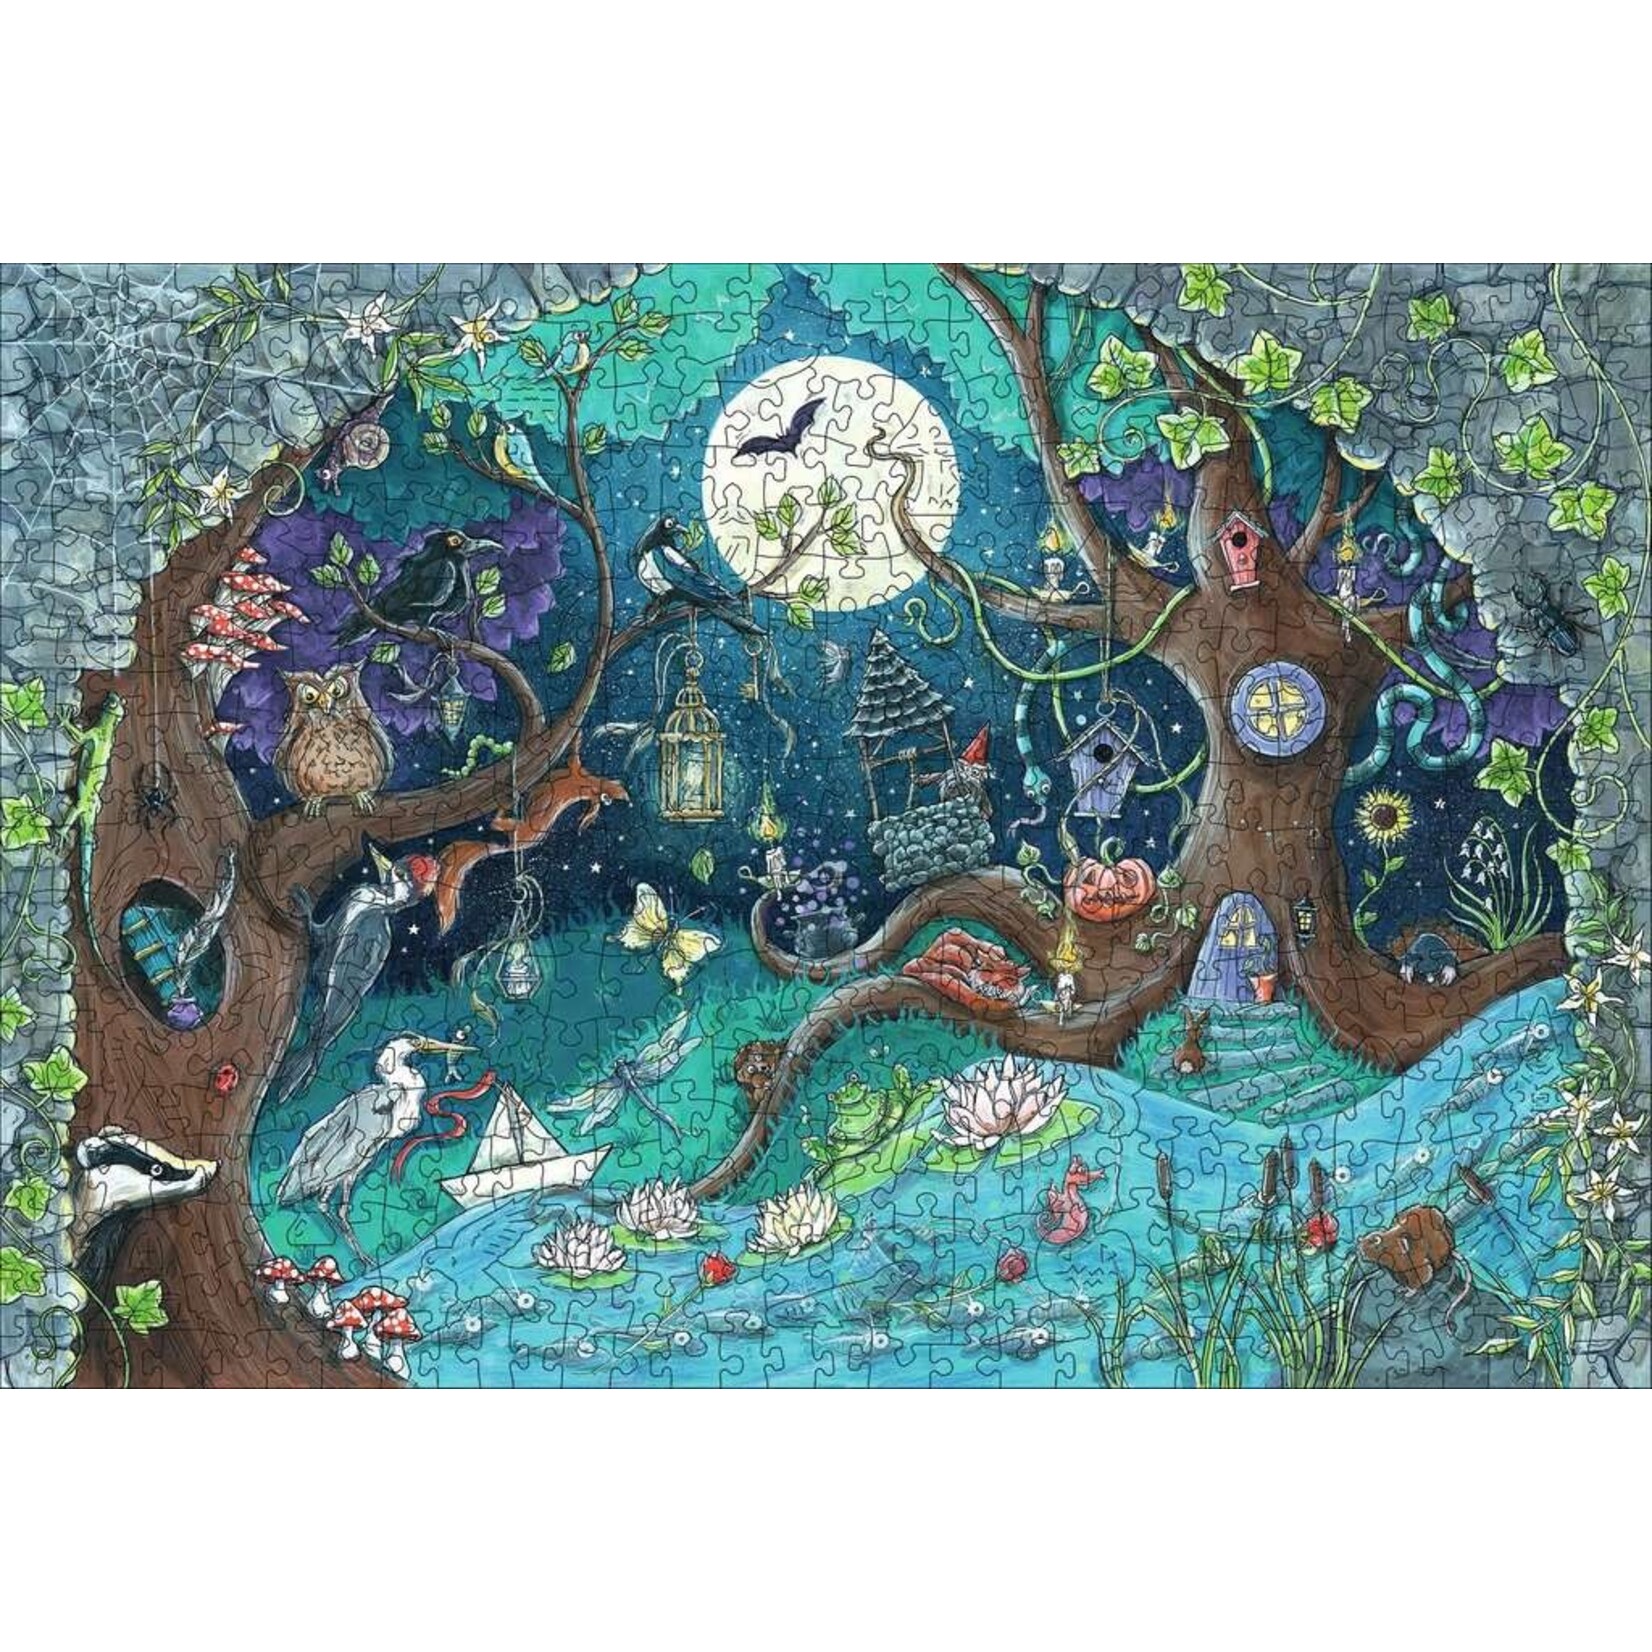 WOOD: Fantasy Forest 500 Piece Wooden Puzzle